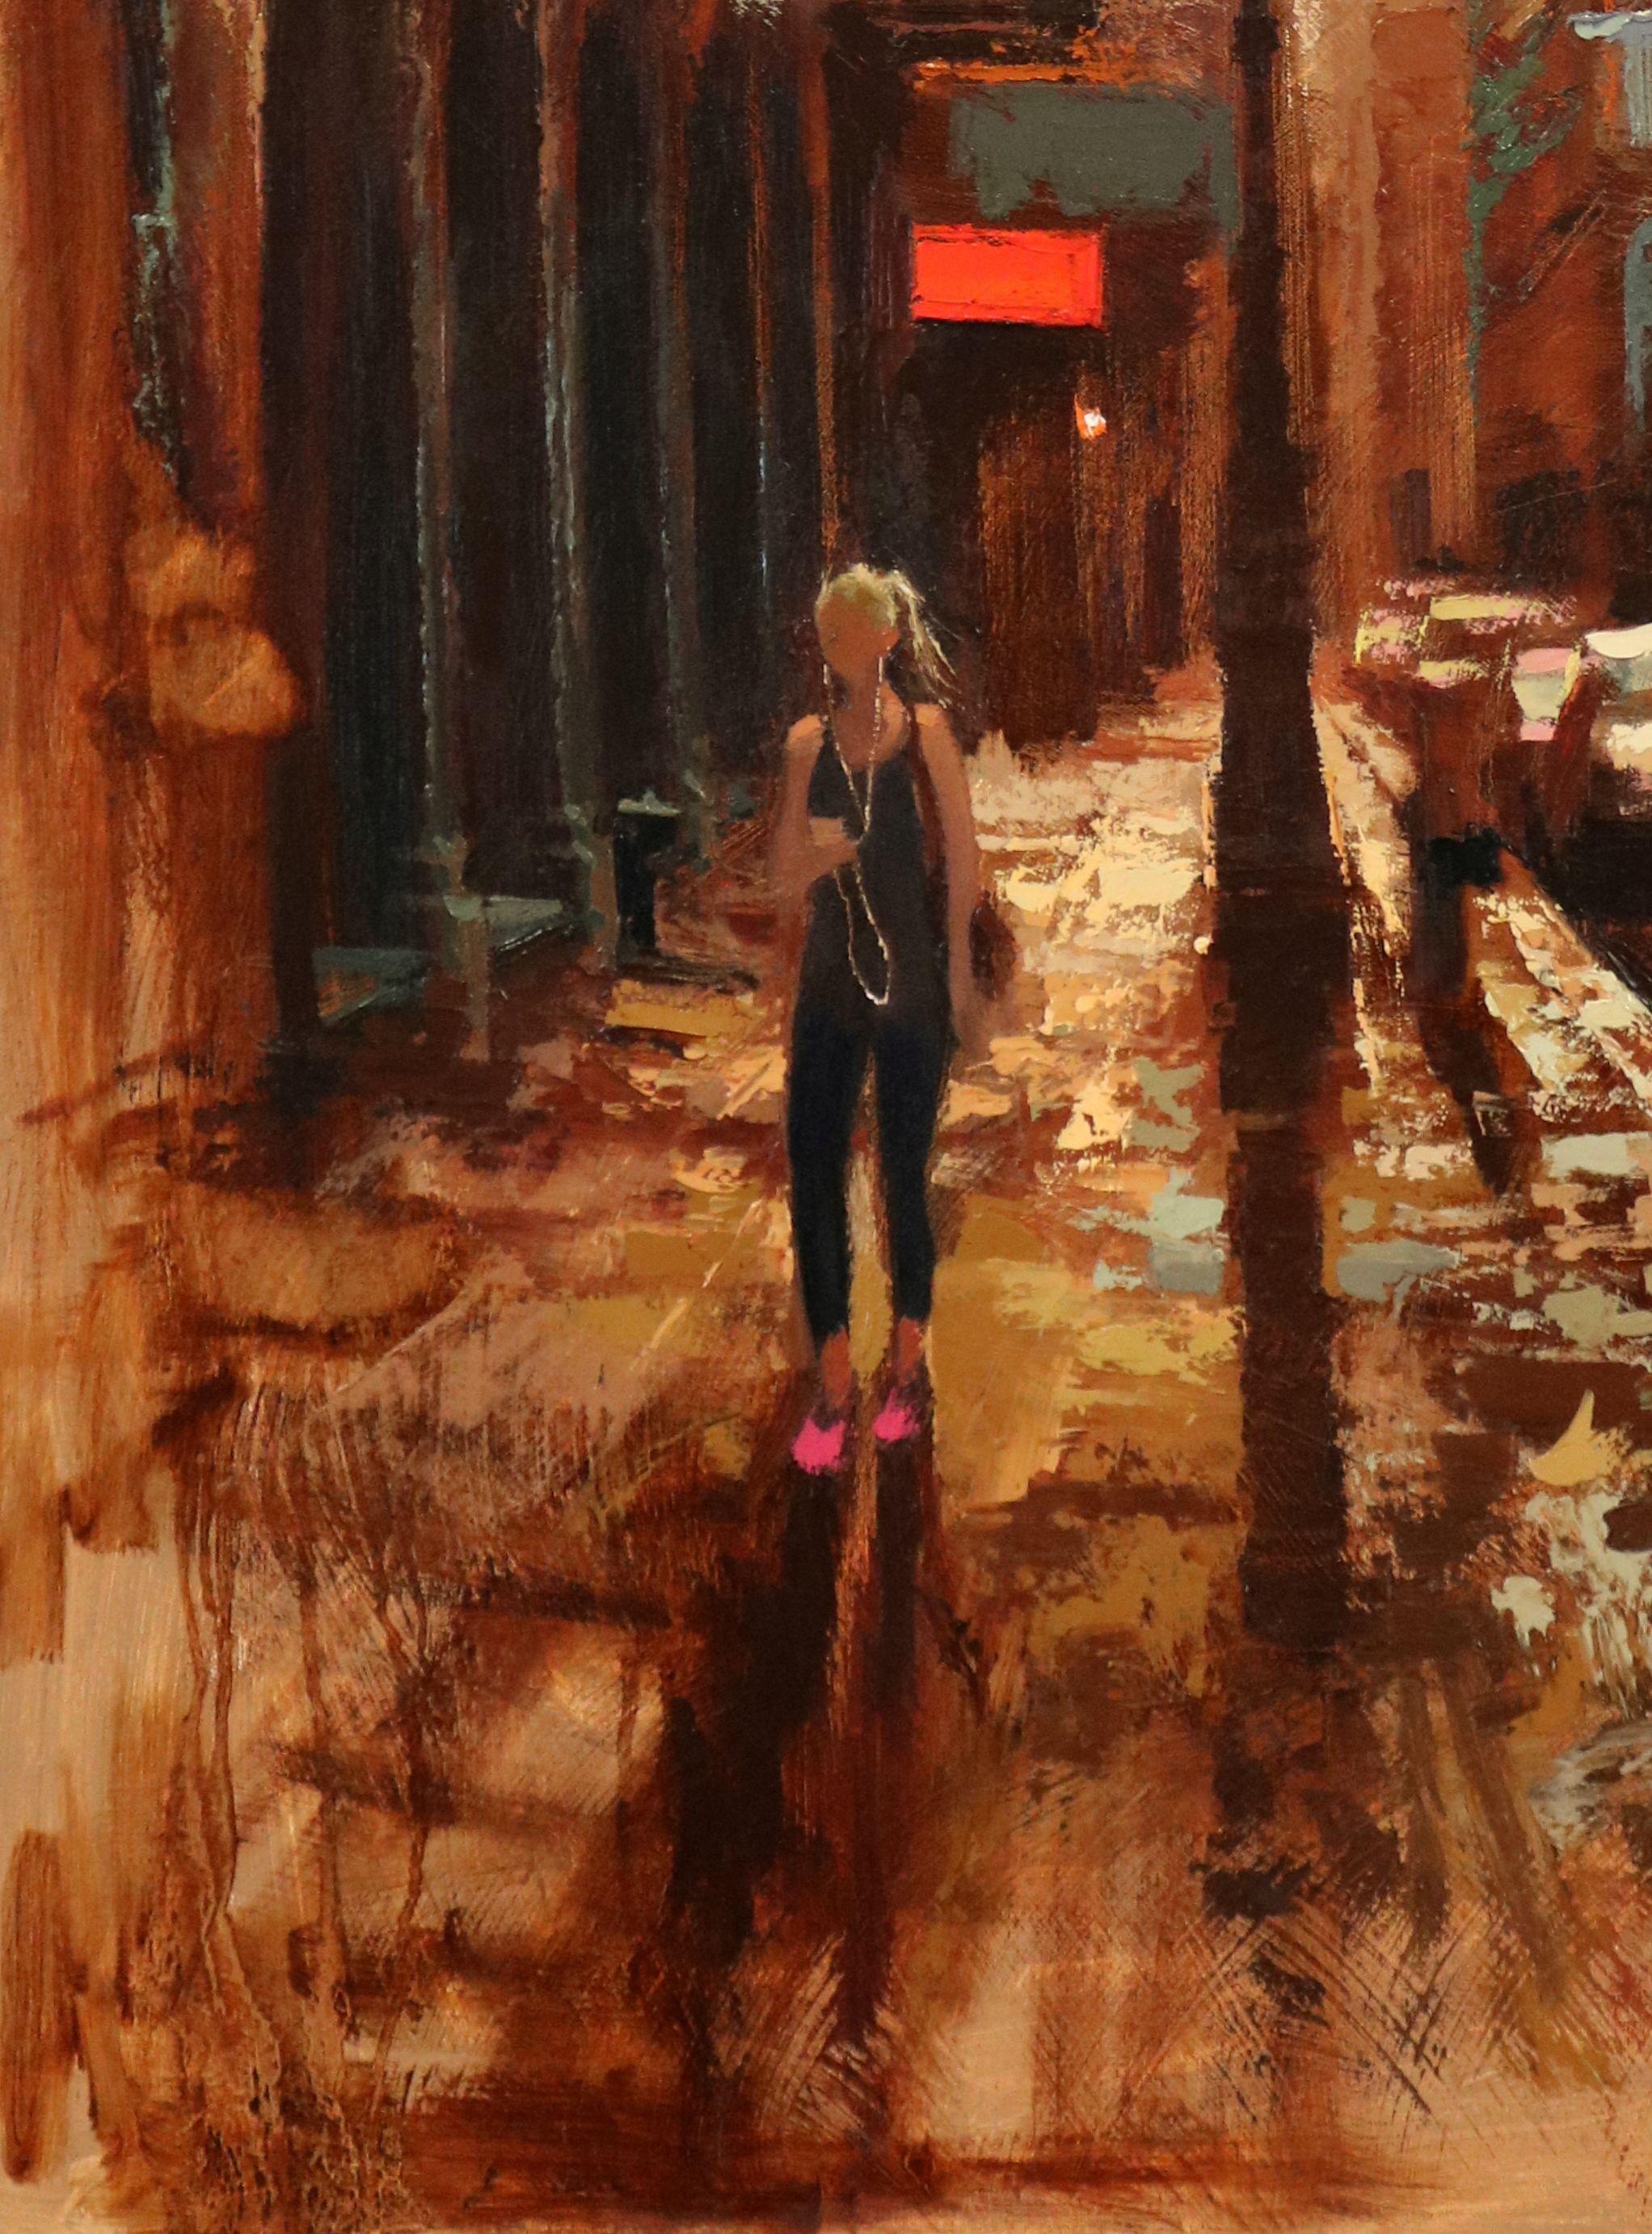 Prince Street After Shower, Painting, Oil on Canvas 1